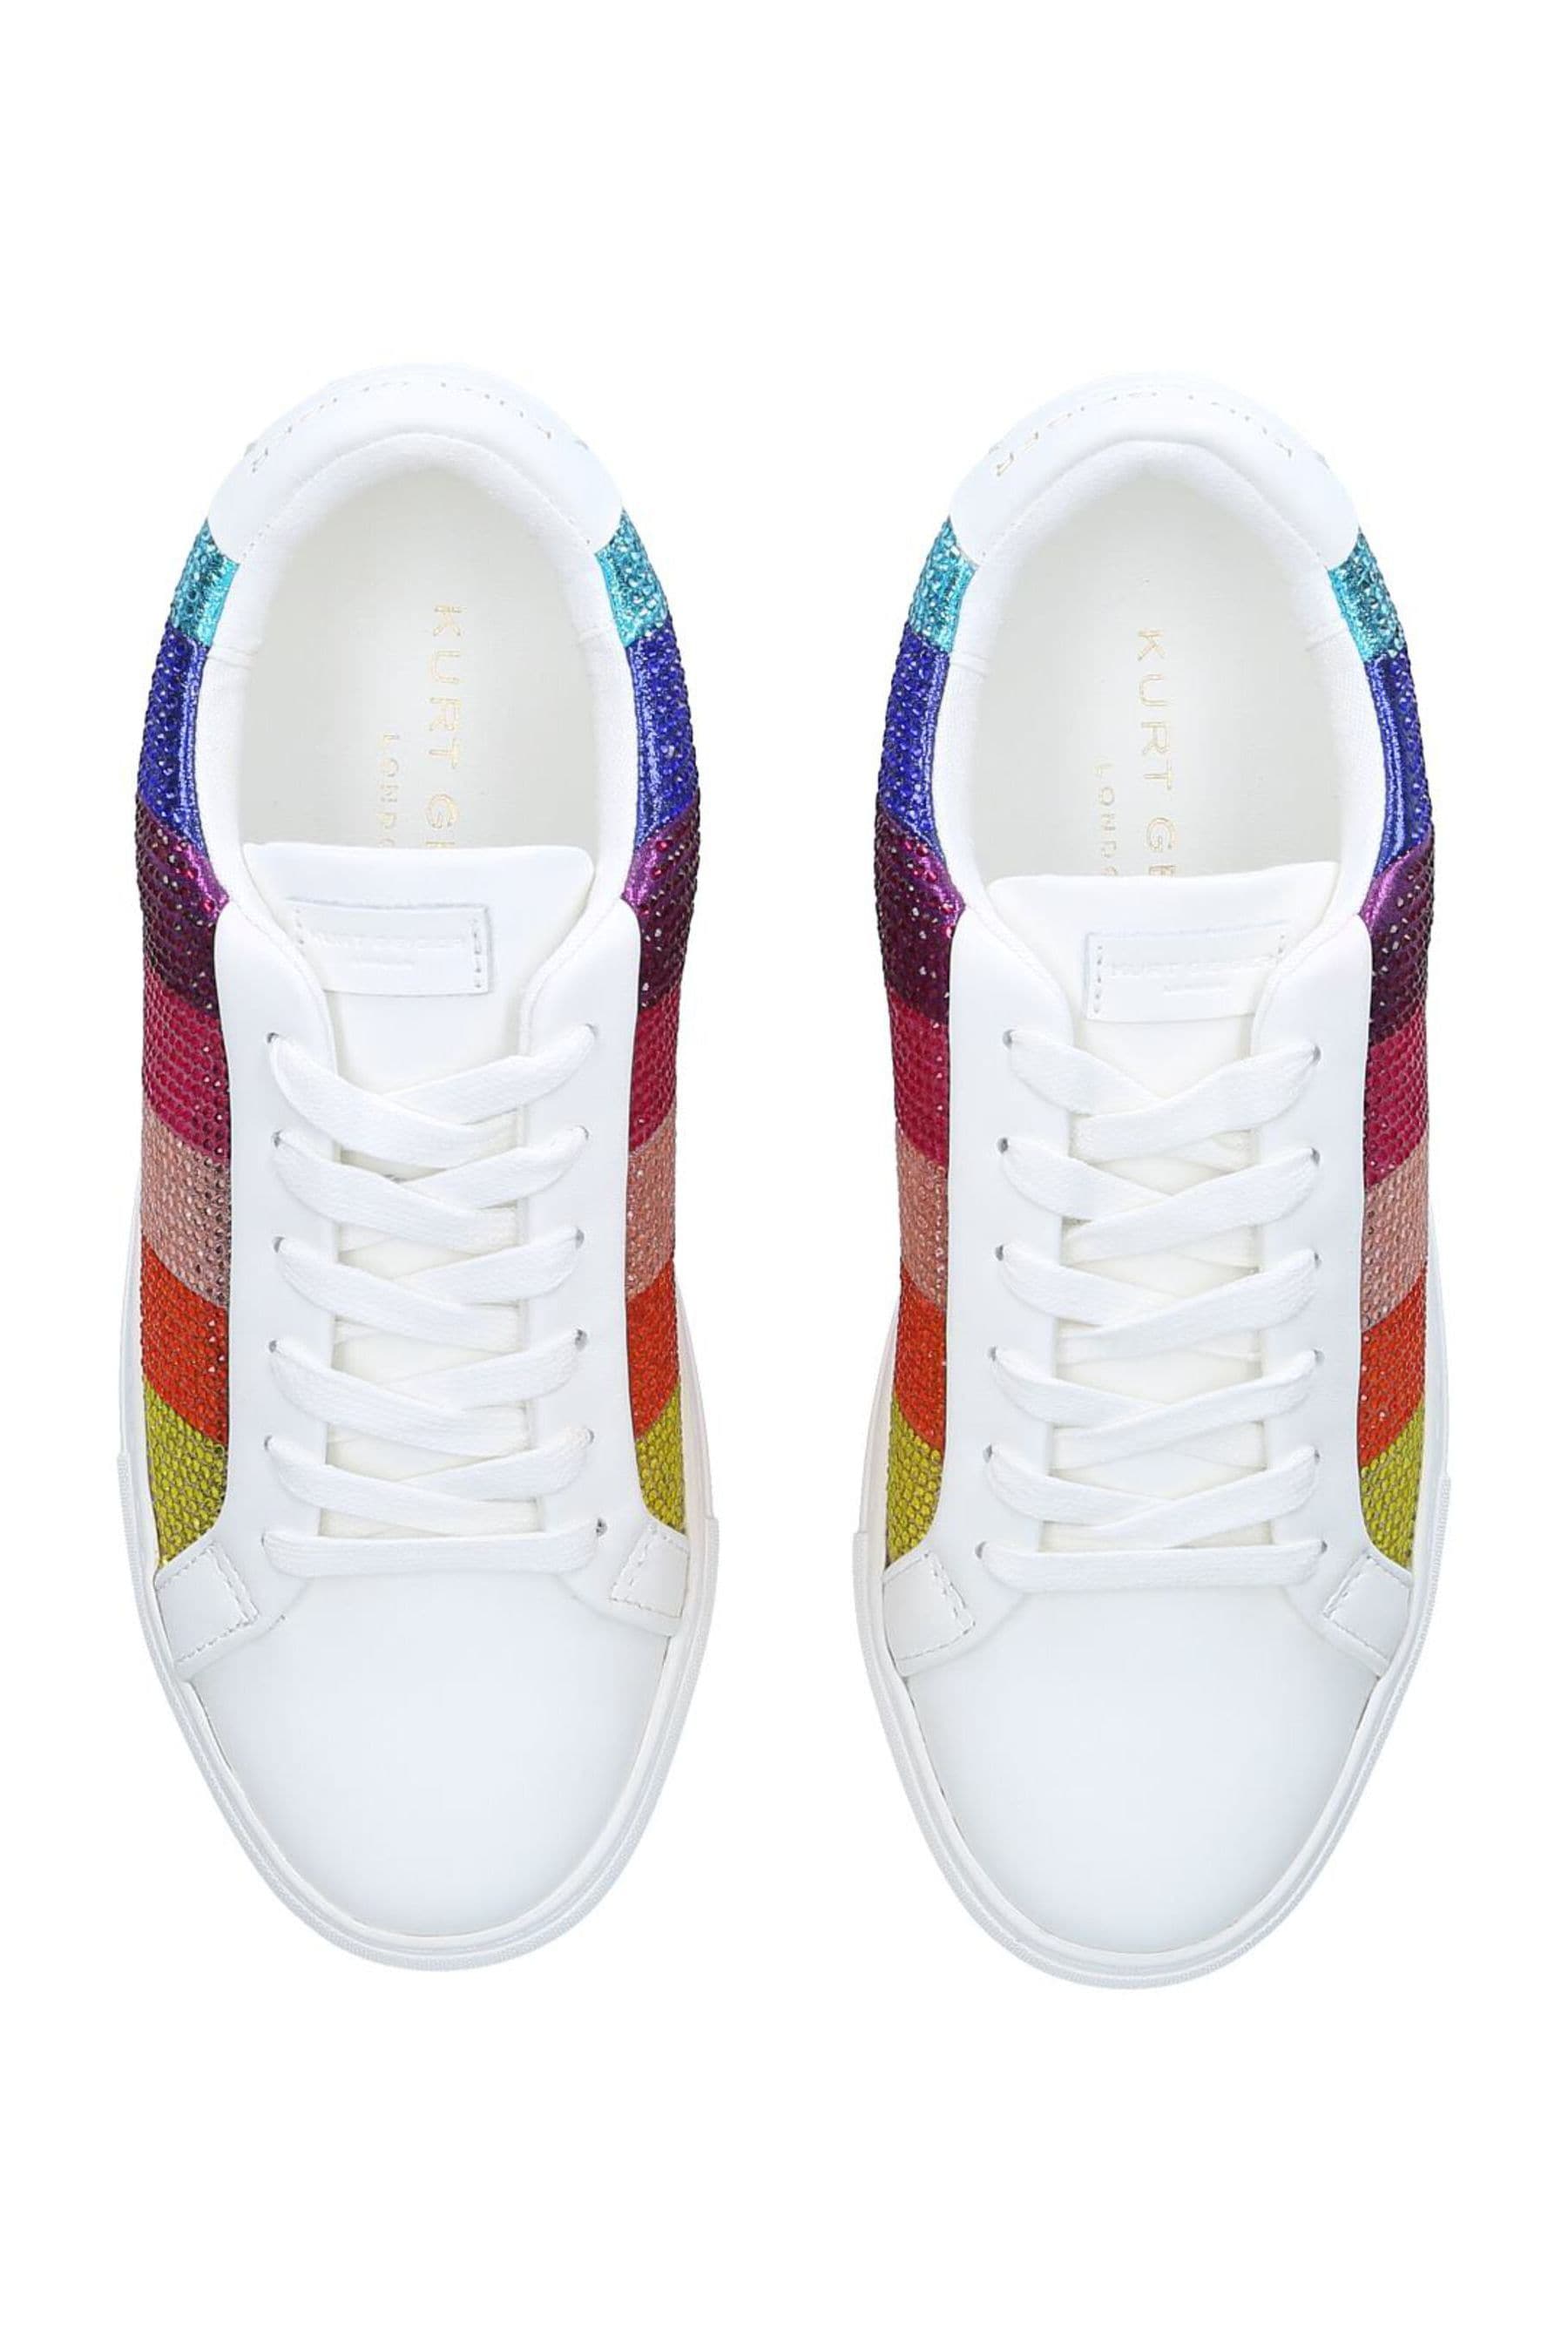 Buy Kurt Geiger London Pink Laney Stripe Crystal Trainers from the Next ...